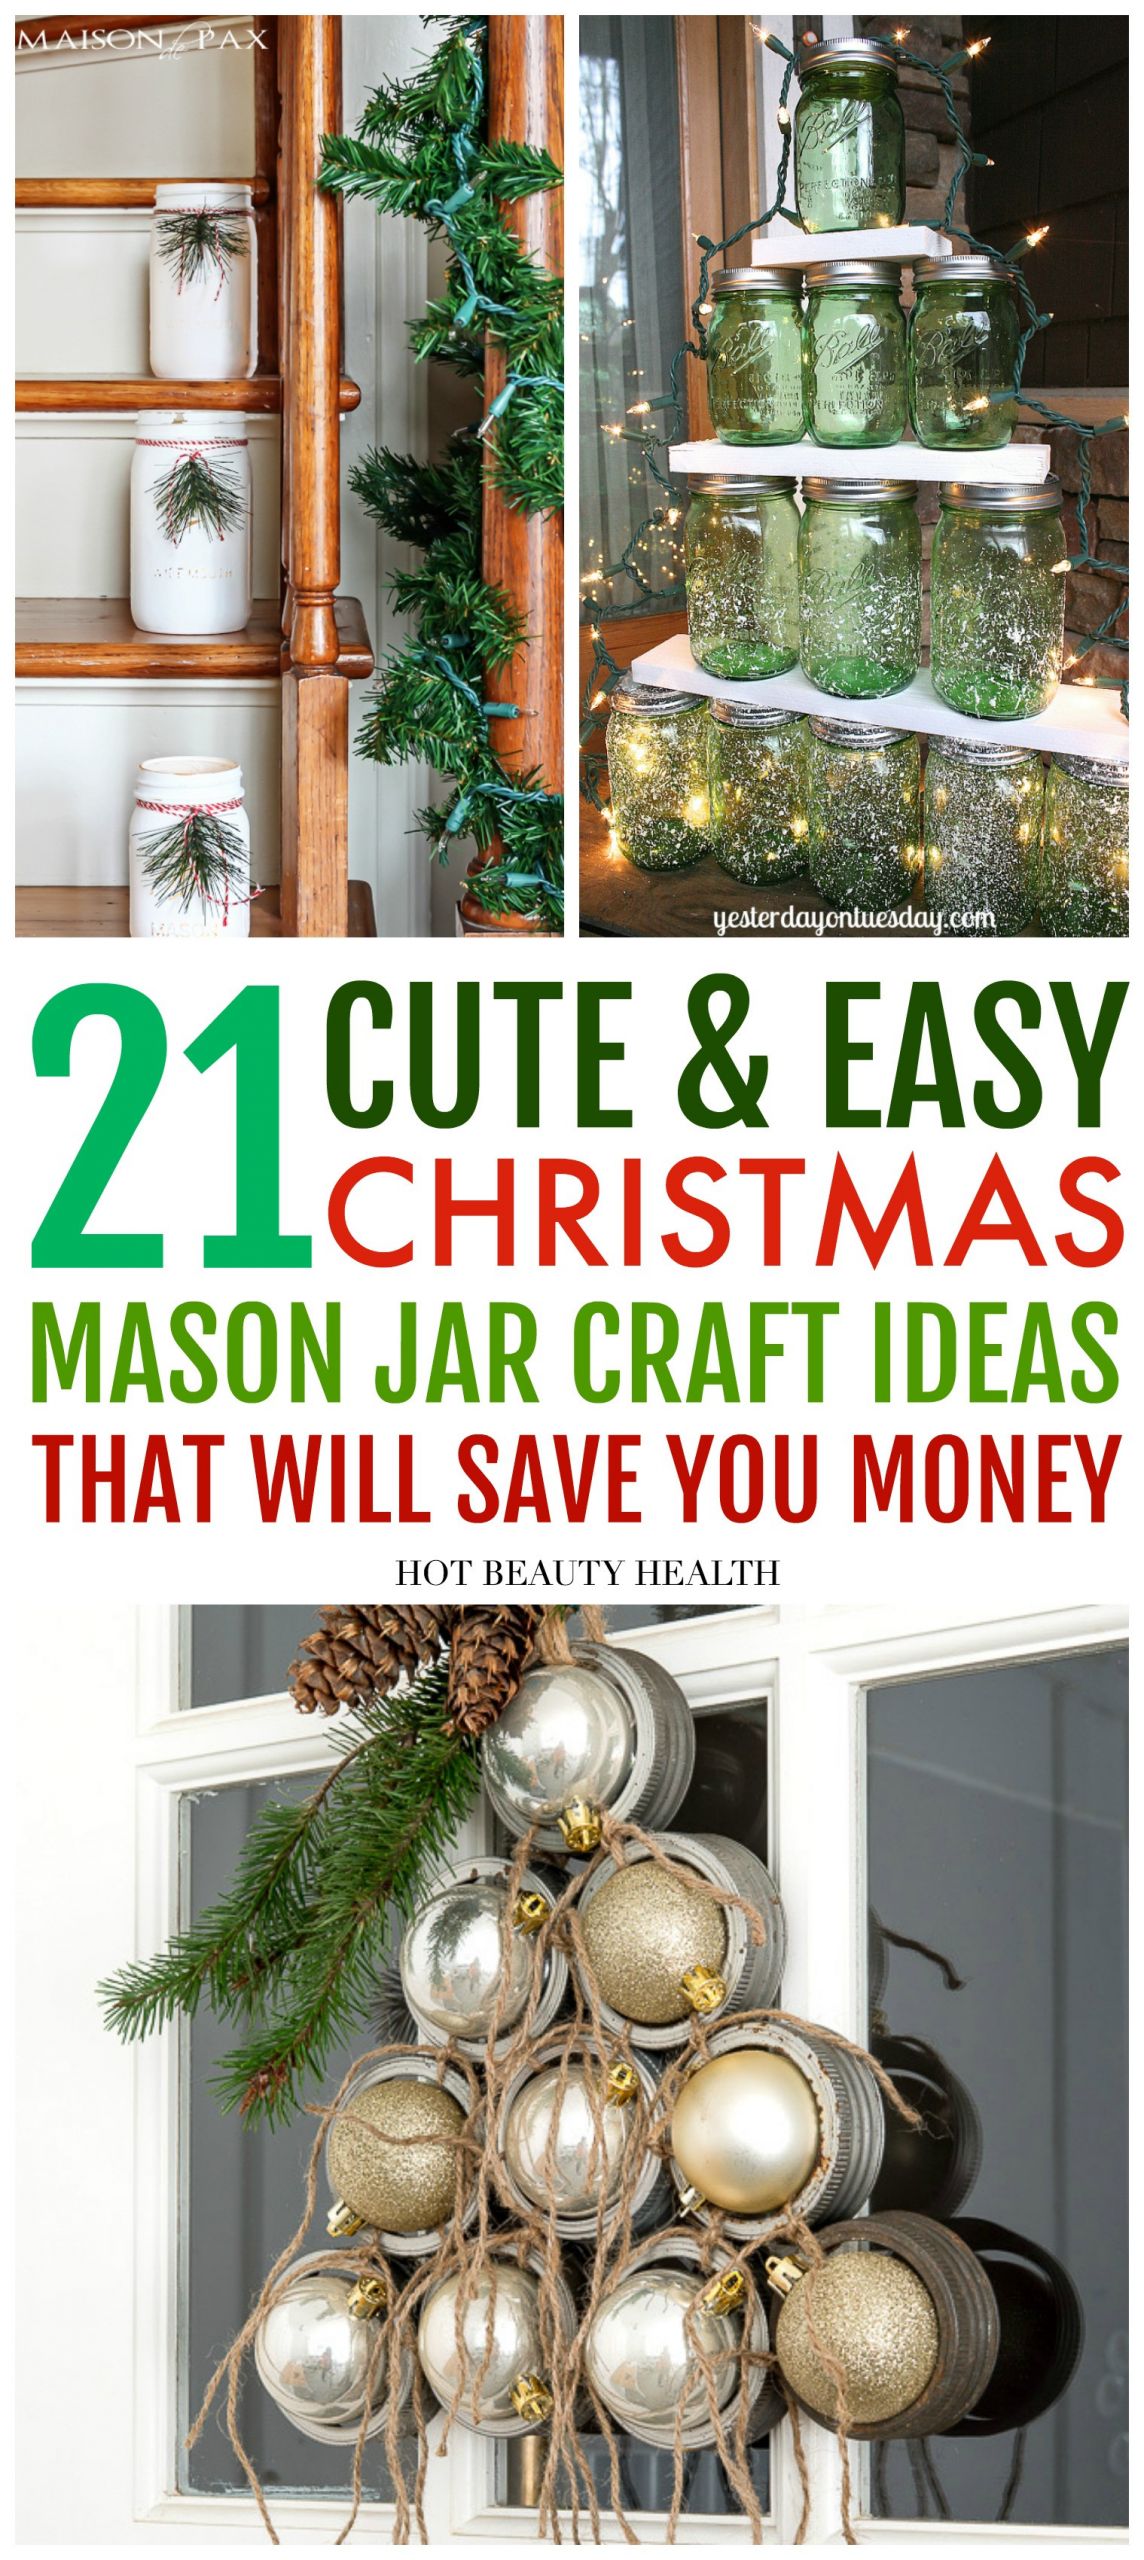 Christmas Gifts Ideas Craft
 21 DIY Christmas Mason Jars to Gift or Decorate With Hot